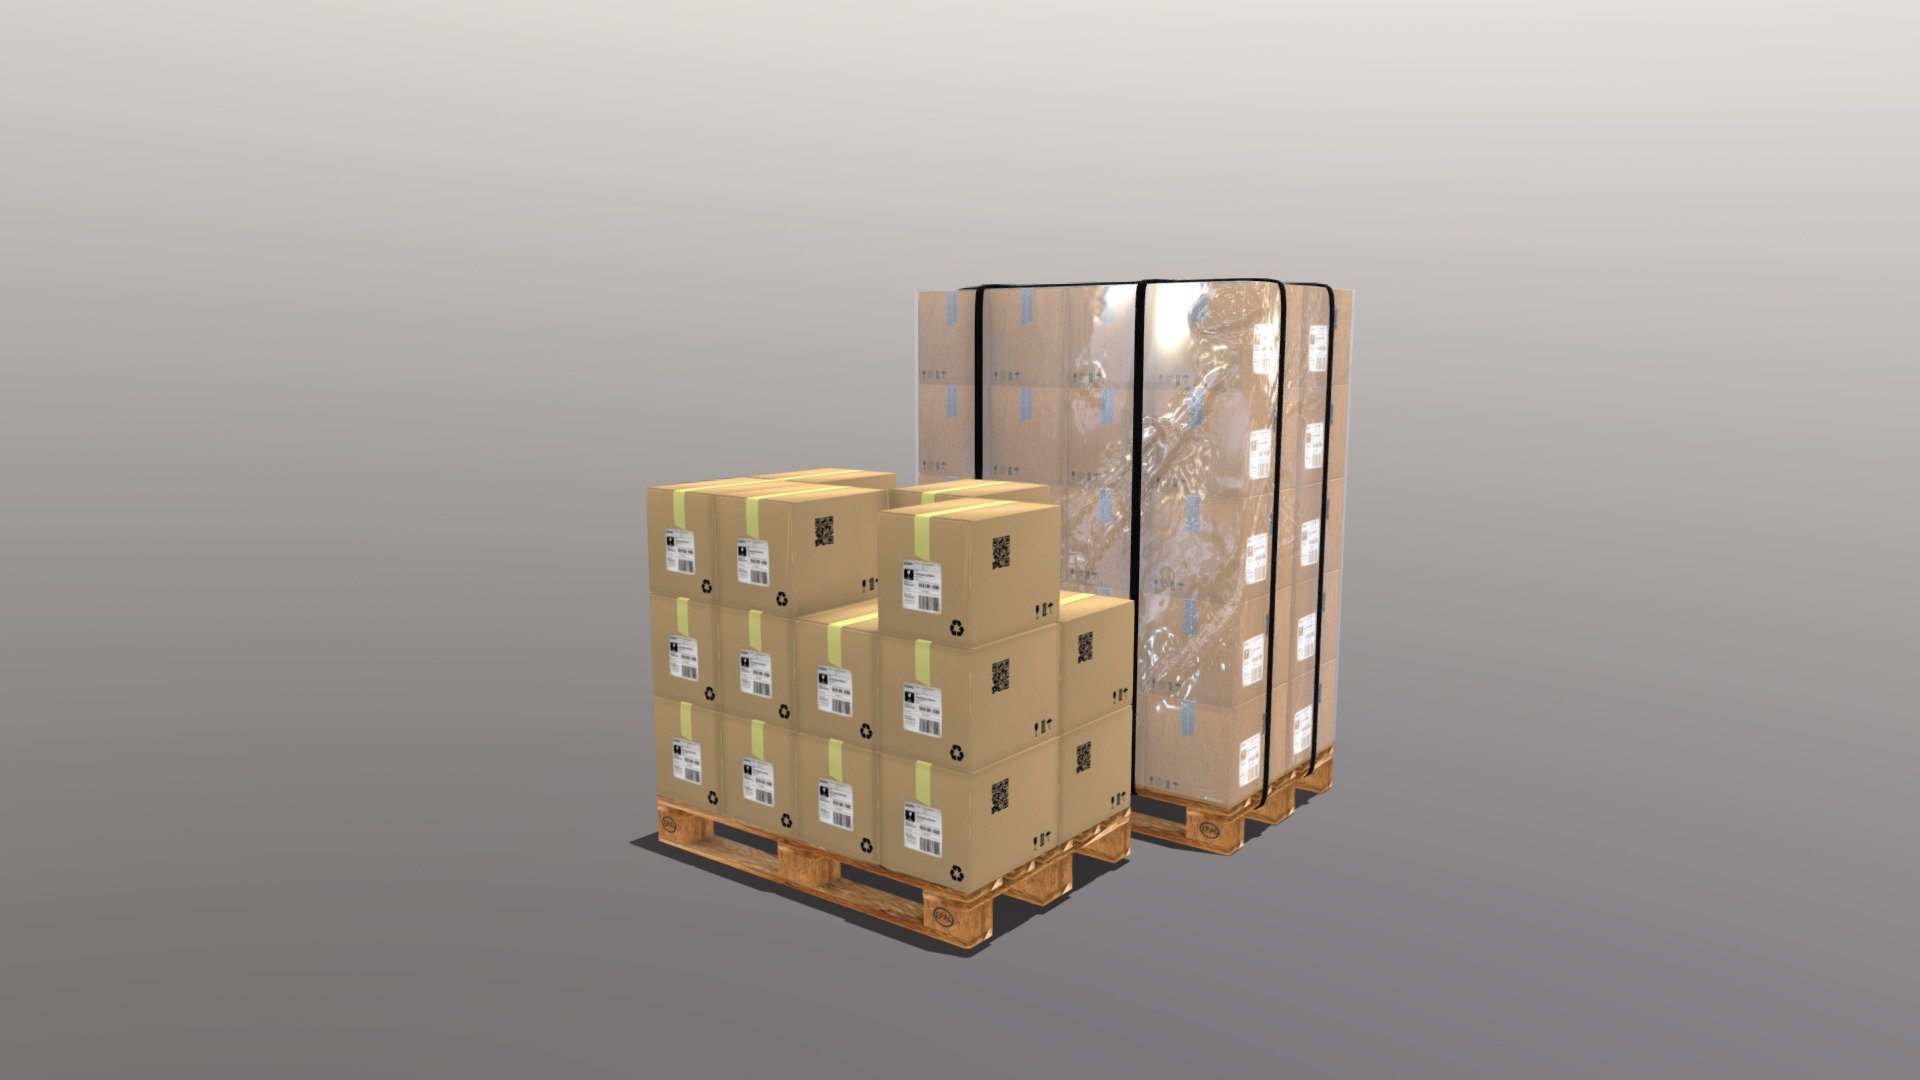 Pallet EUR-EPAL 1200x800x144. EUR1 ISO1. 
Box 400X300X300. 
The model can be used to design and visualize the arrangement of equipment in the workshop. 
Preparing presentations on the topic of production organization Modeling of material flows within production. 
We greatly appreciate you choosing our 3D models and hope they will be of use. 
We look forward to continuously dealing with you 3d model